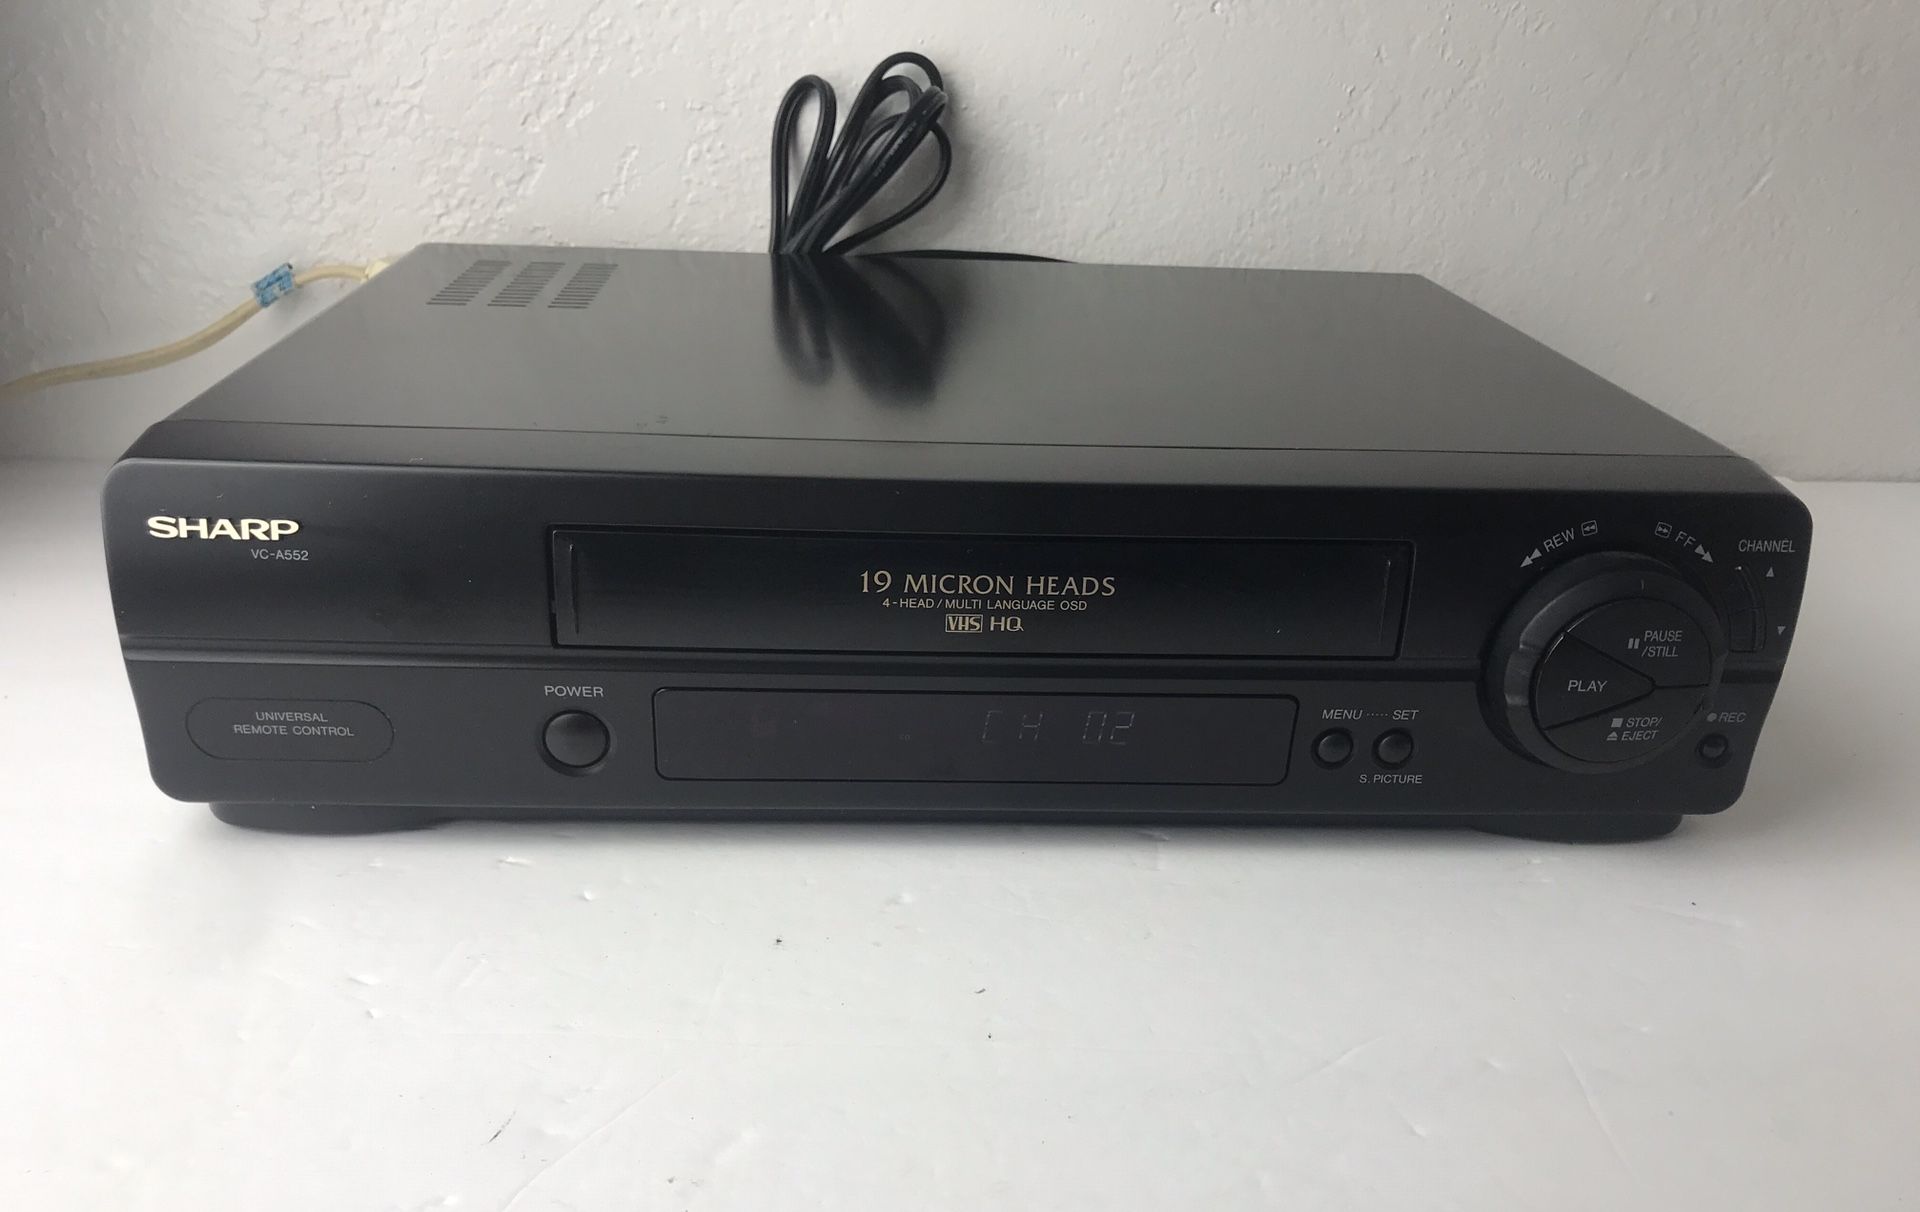 Sharp VC-A552U VCR VHS Player/Recorder Great Work (not Control Remote)&